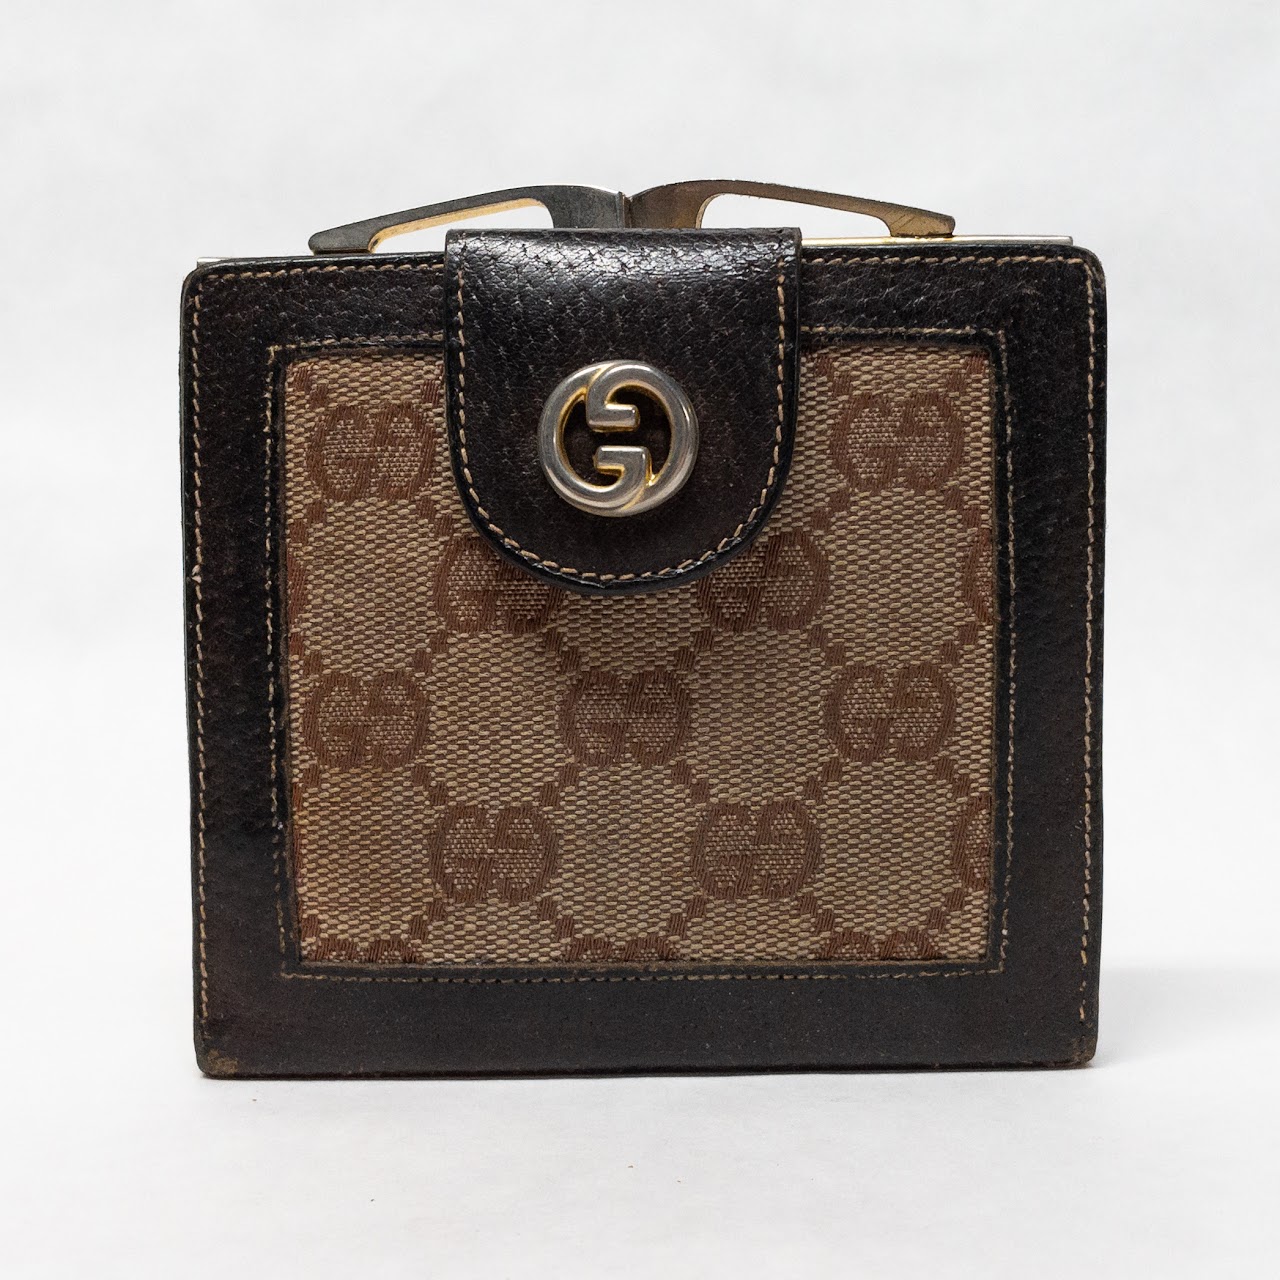 Sold at Auction: VINTAGE GUCCI GG LOGO FOLDING TOTE FOLDS IN POUCH